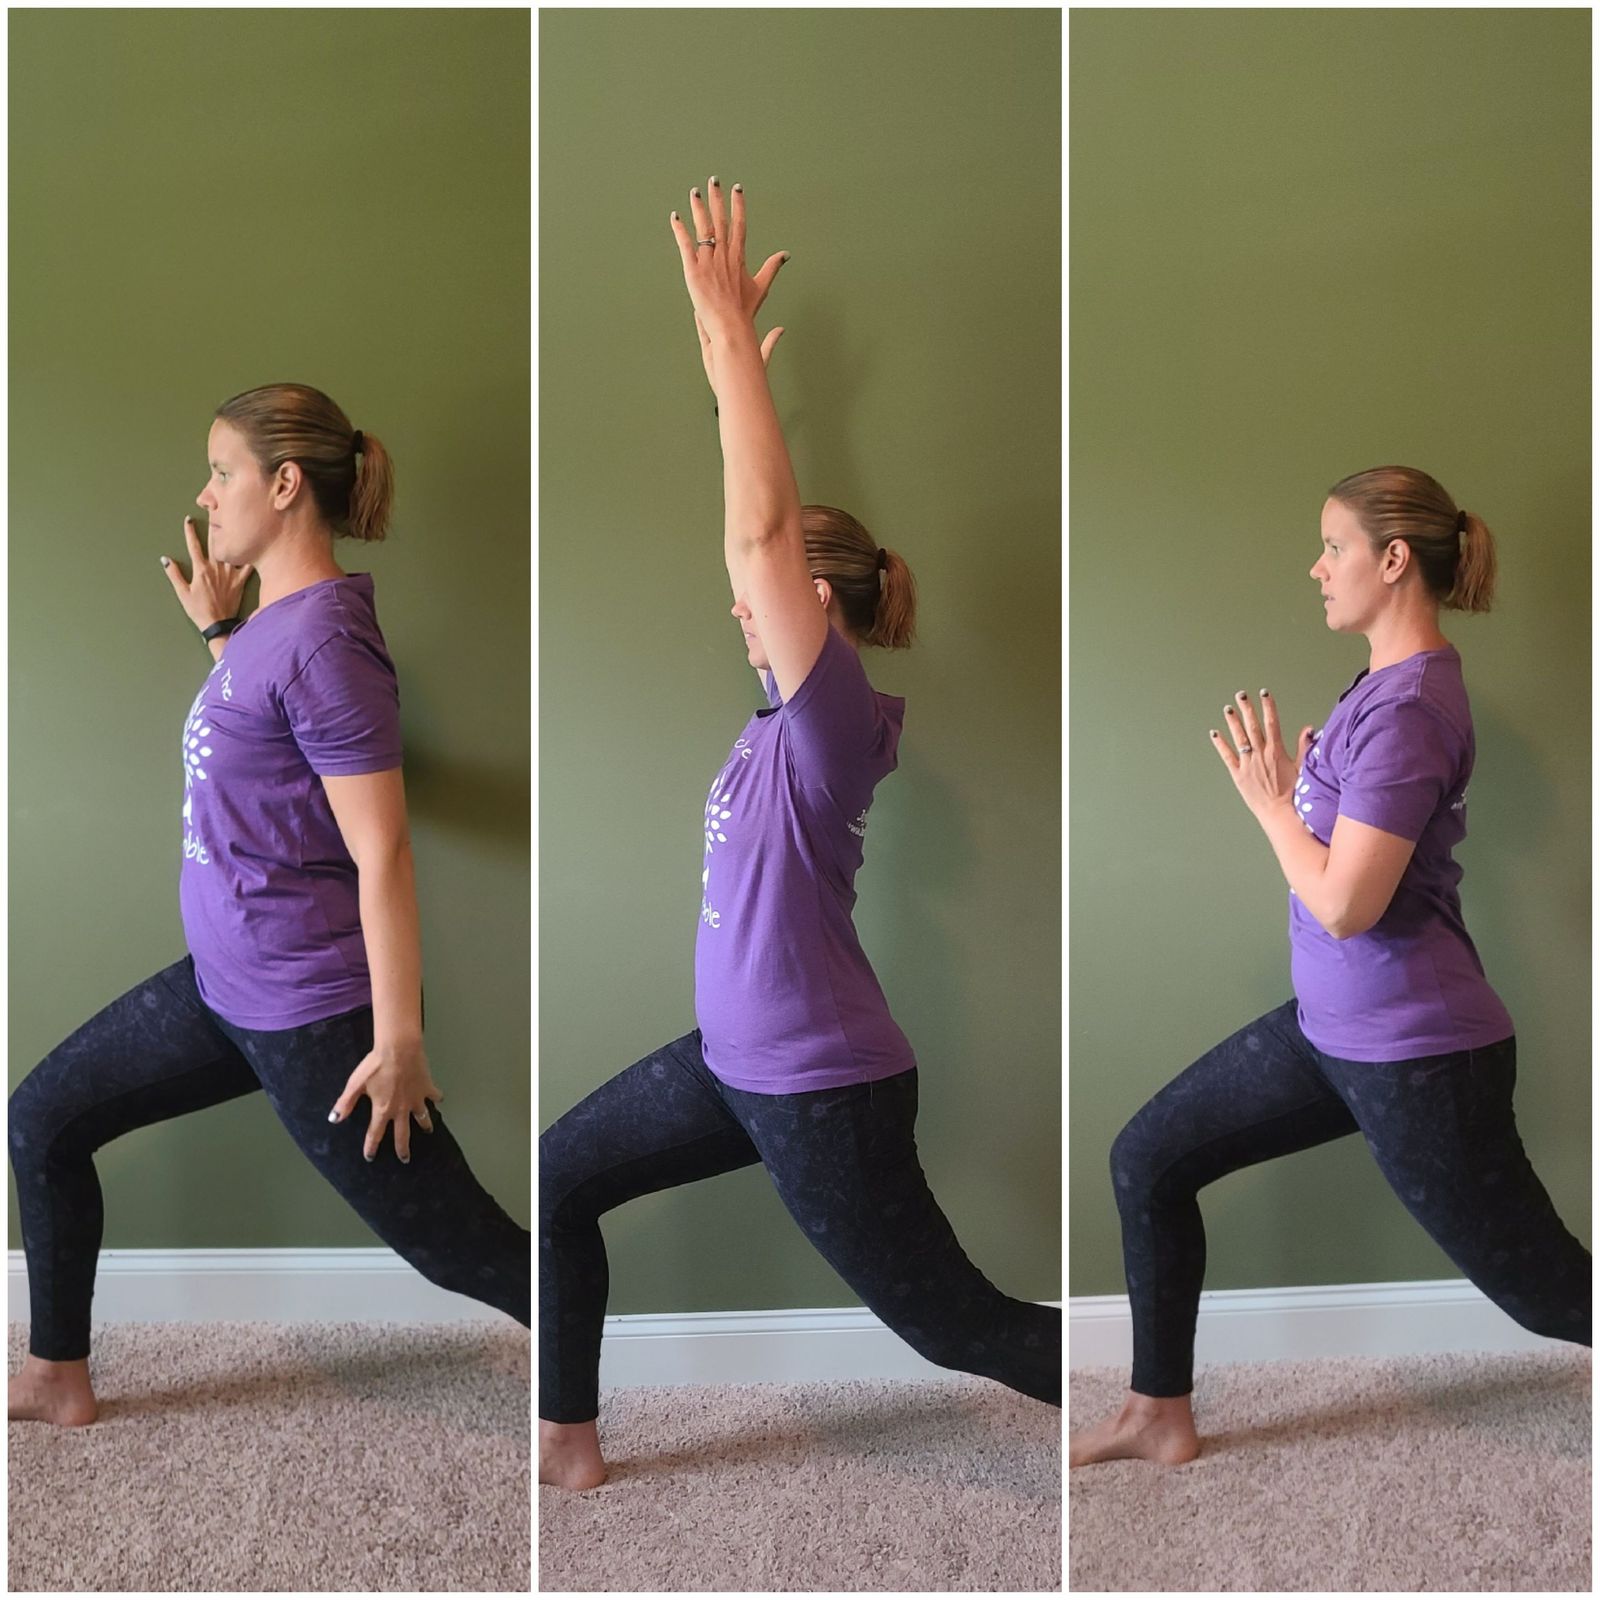 Mountain Pose with Prayer Hands - Exercise How-to - Skimble